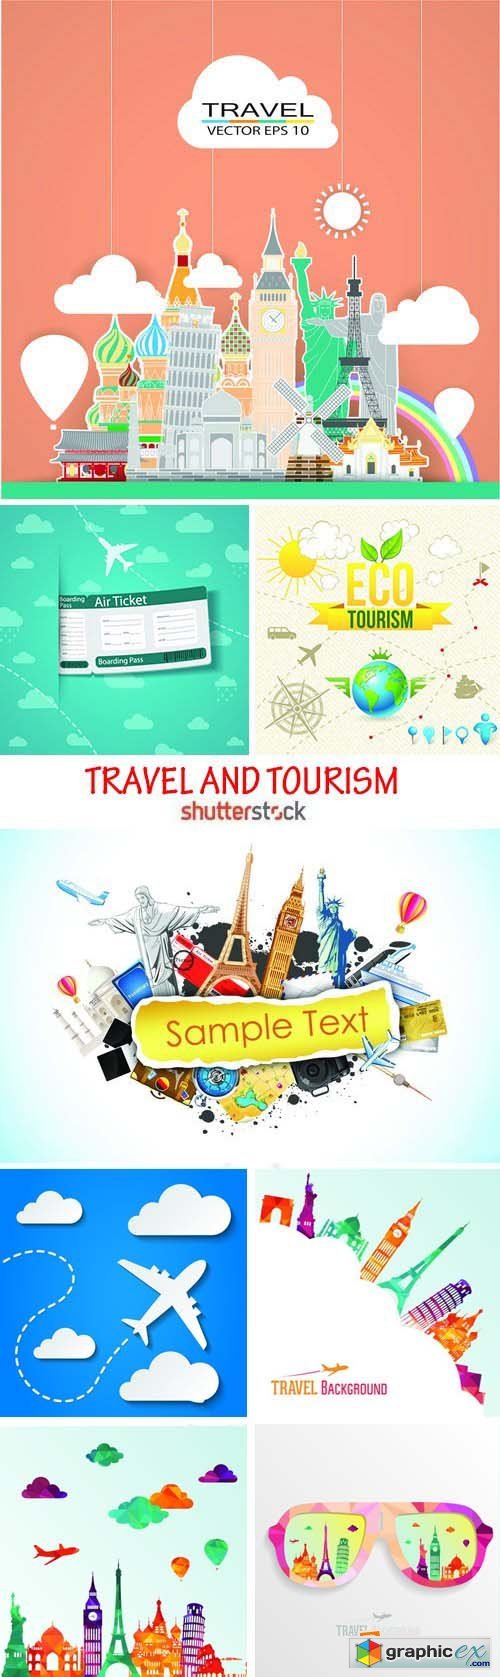 Amazing SS - Travel and tourism 2, 25xEPS